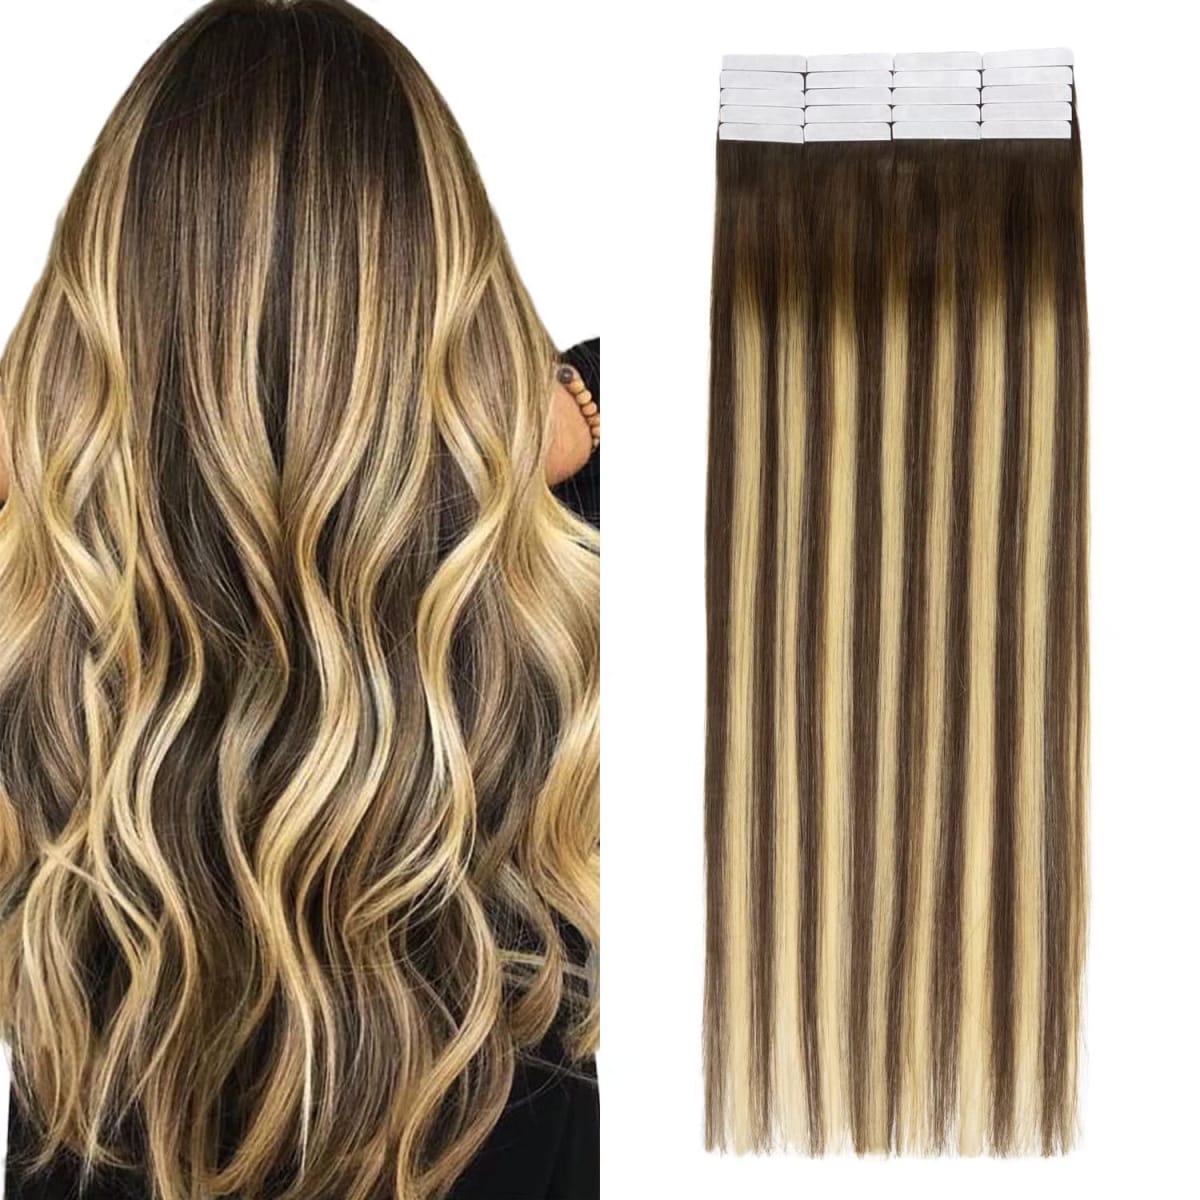 Maxfull Brown Balayage Tape In Remy Human Hair Extensions, For Fine Thin Hair,Seamless Silicon Tape In Hair Extensions, 20pcs, 18inch, 50g